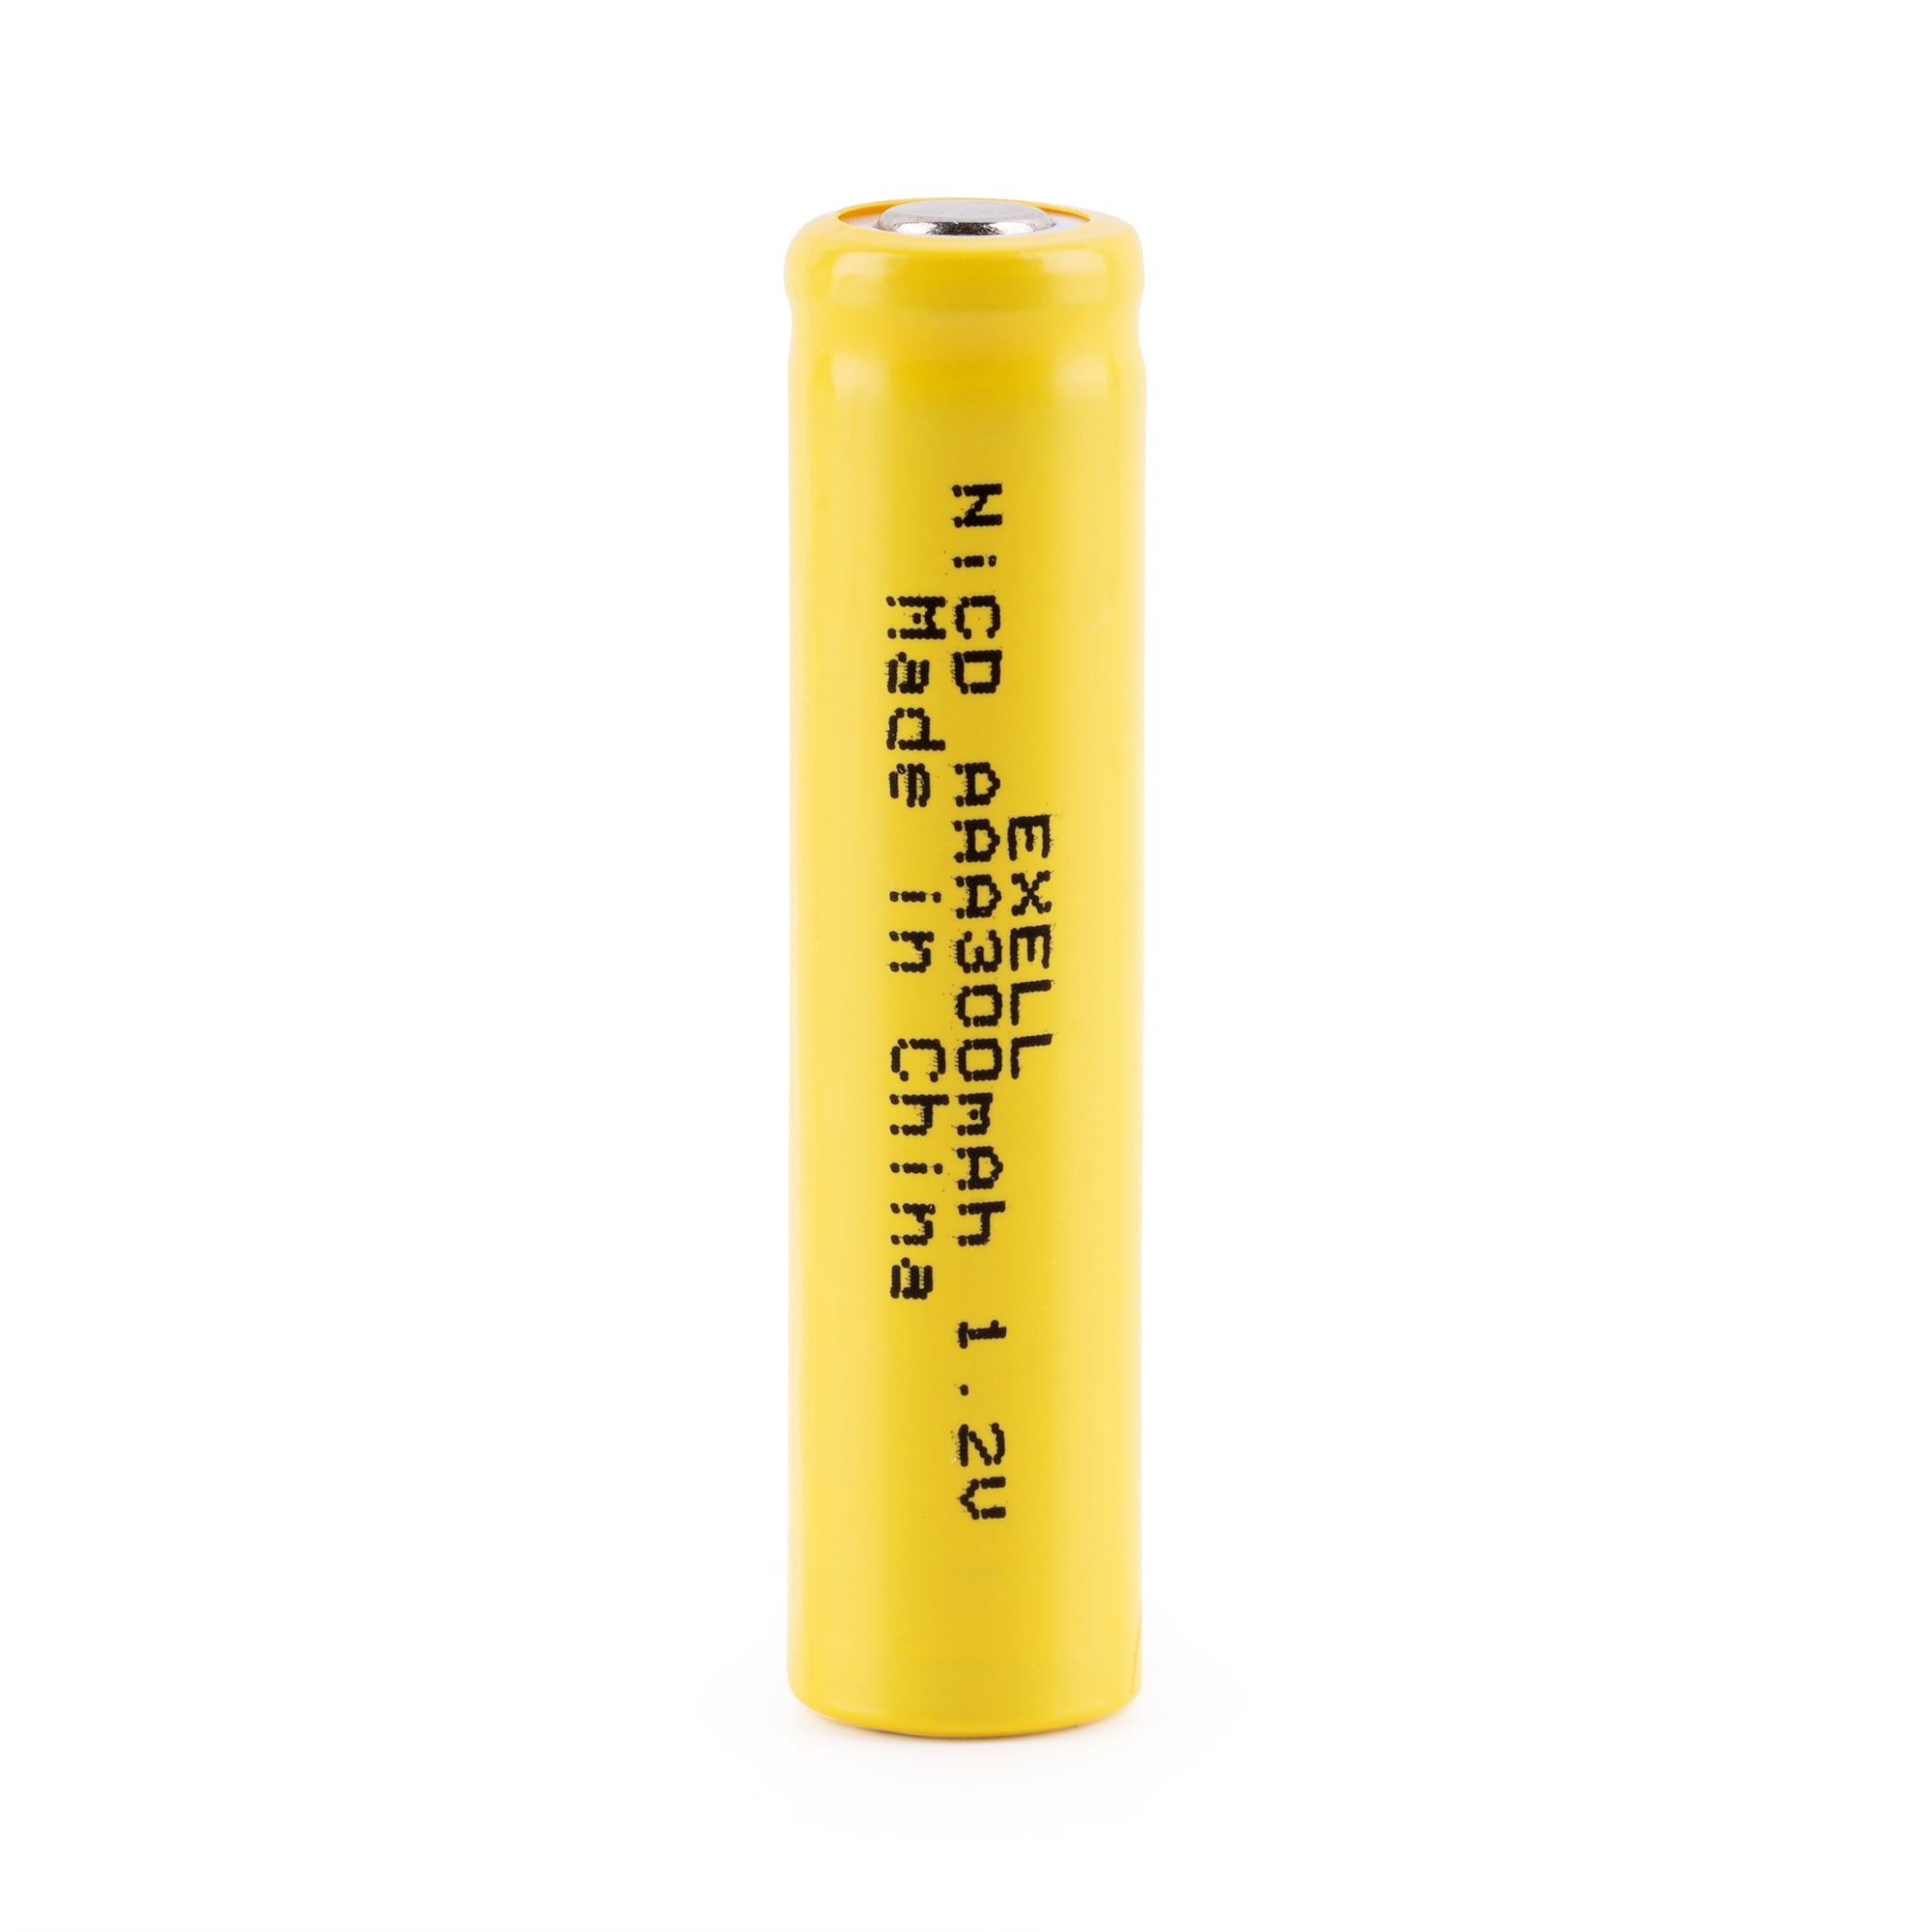 16 Pcs 1.5VAA Rechargeable High-Performance Alkaline Batteries, Recharge up  to 400-500 Times, Standard Capacity 3000 mAh, Pre-Charged